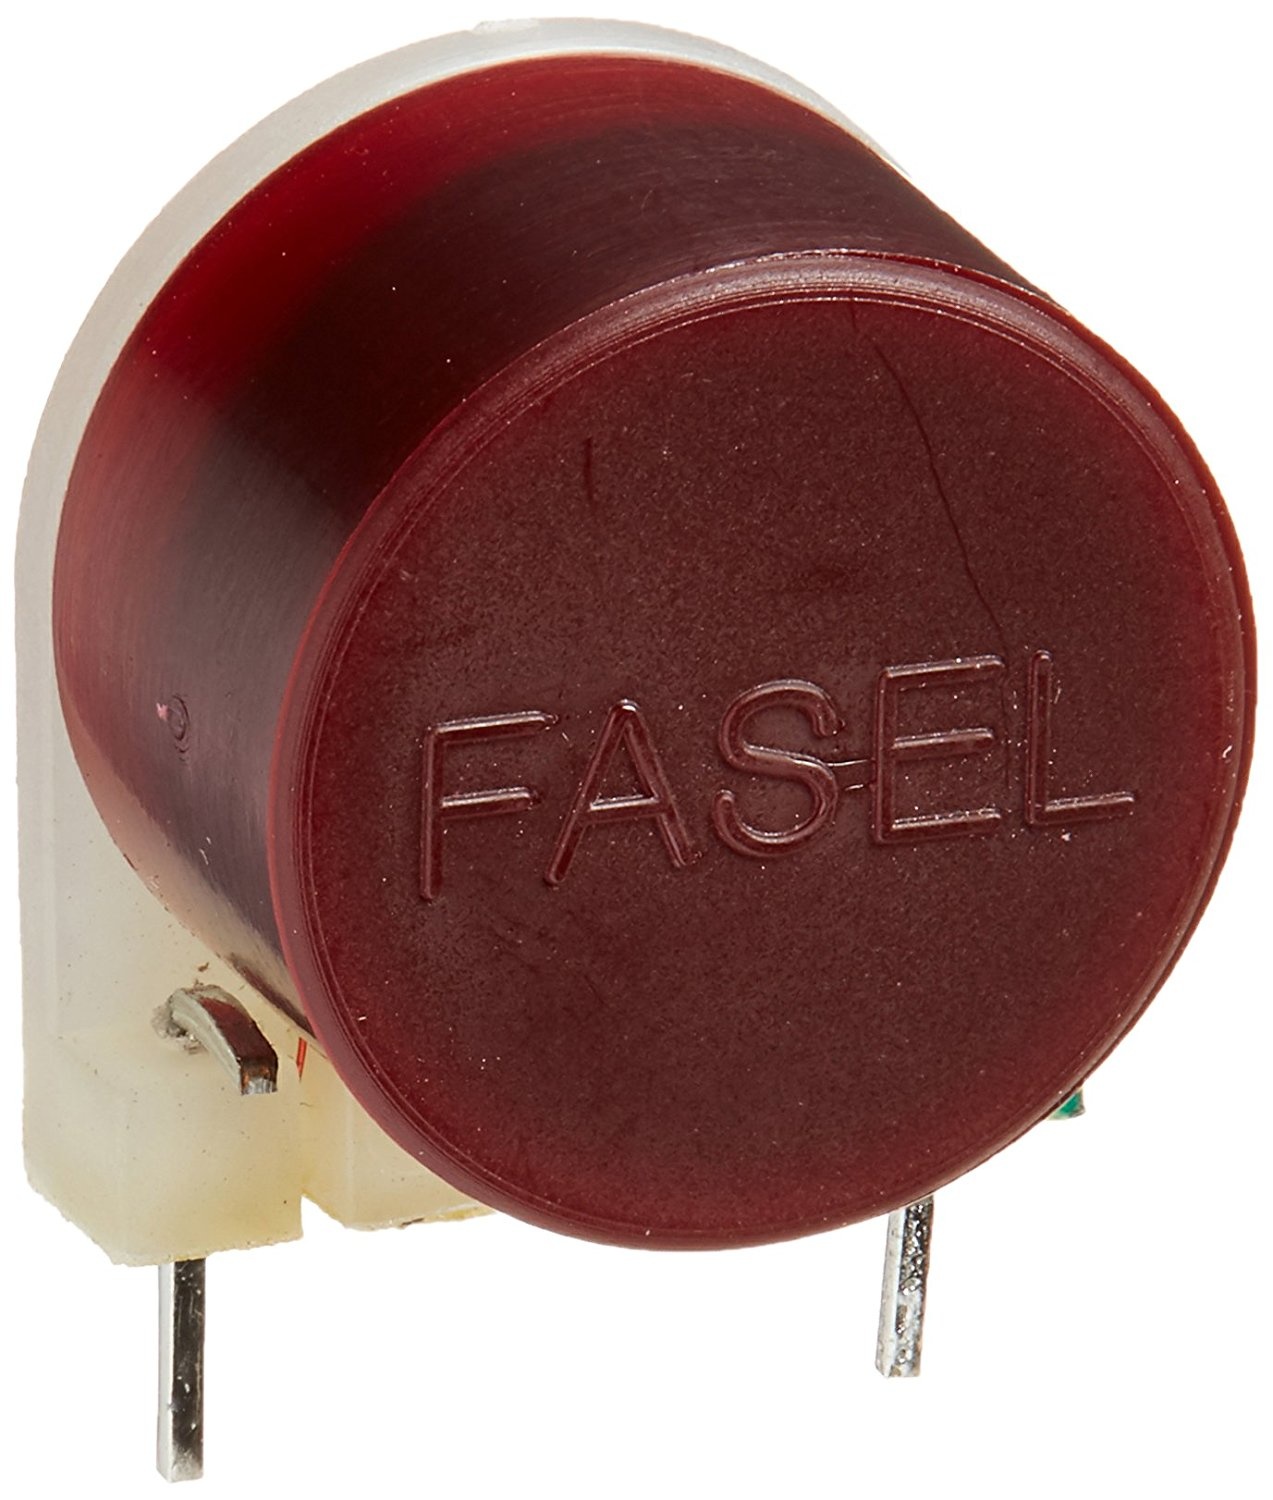 Jim Dunlop - Fasel Red - Inductor for Crybaby Wah Wah - La Boîte Musicale